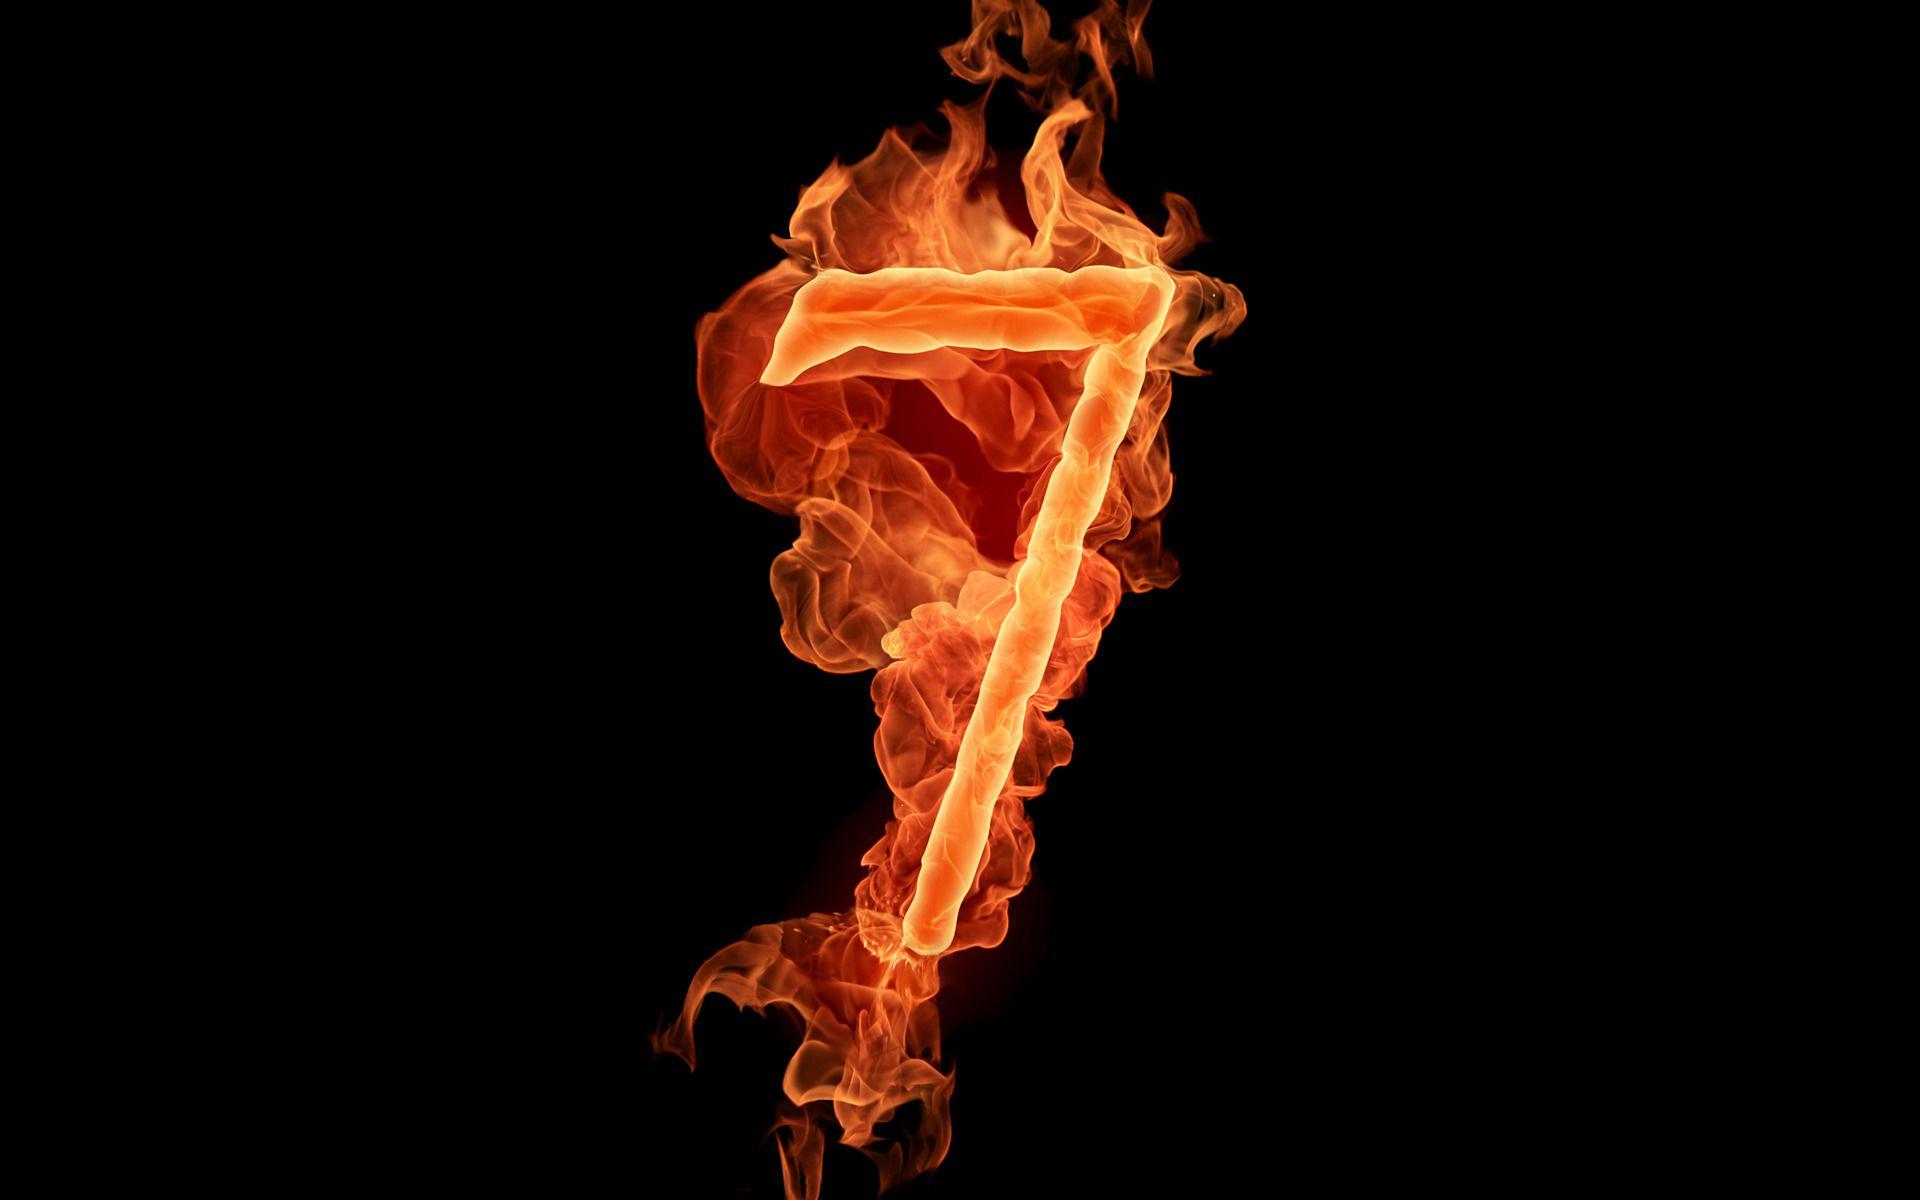 Flaming Fiery Number 7 Wallpaper